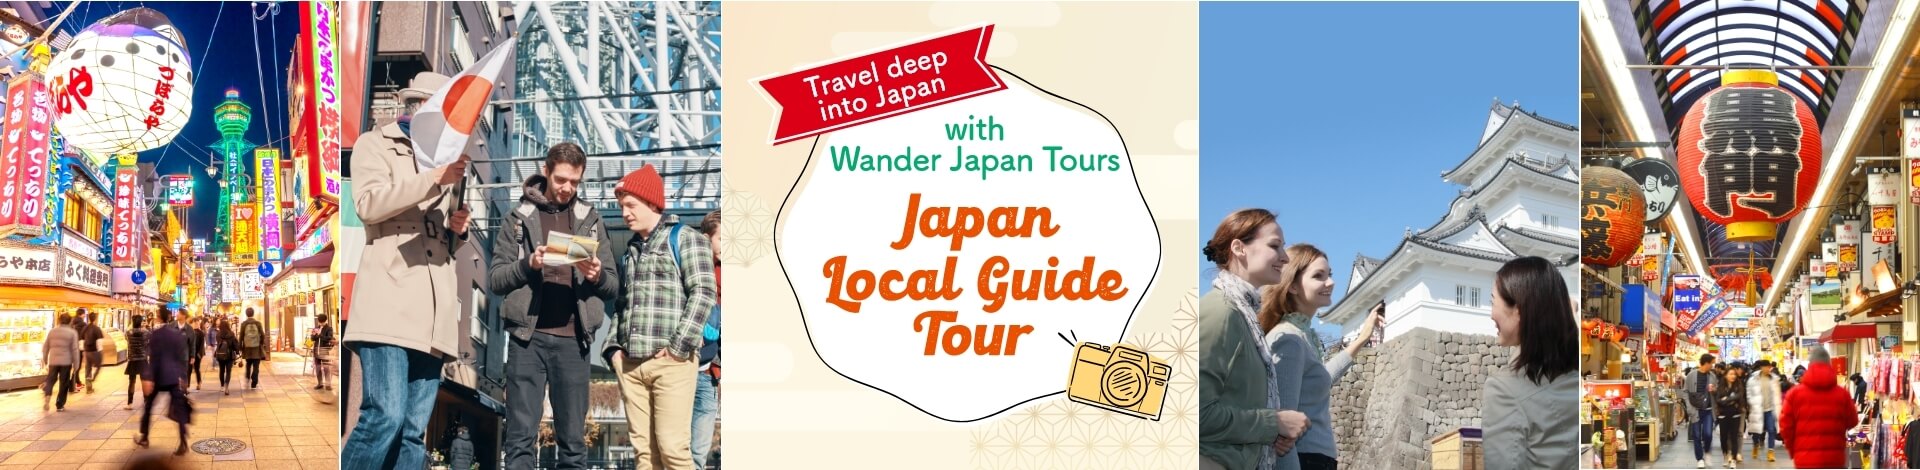 Japan Local Guide Tour